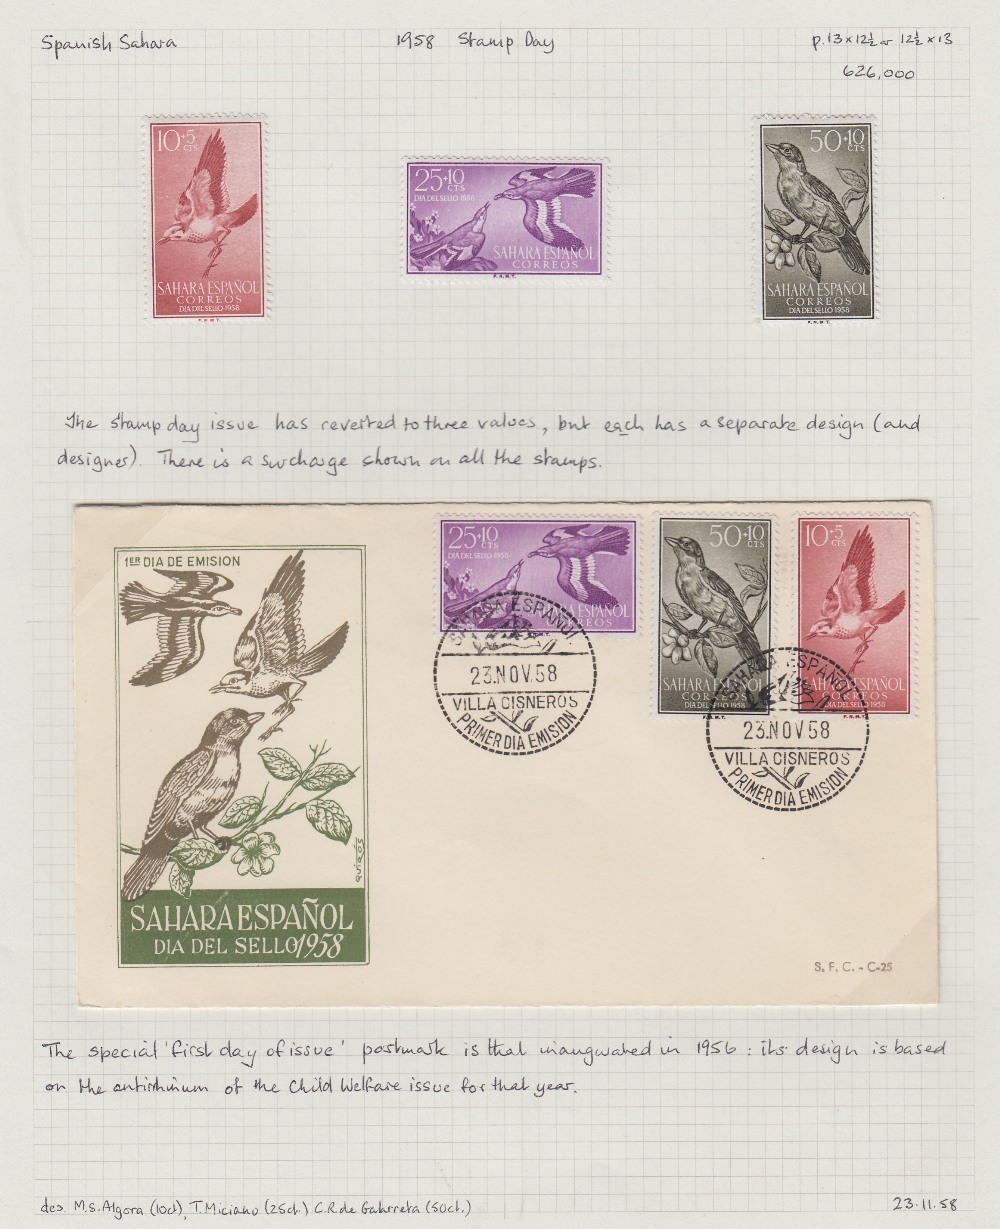 STAMPS SPAIN Album of stamps and covers Spanish Sahara, neatly written up pages, - Image 5 of 5